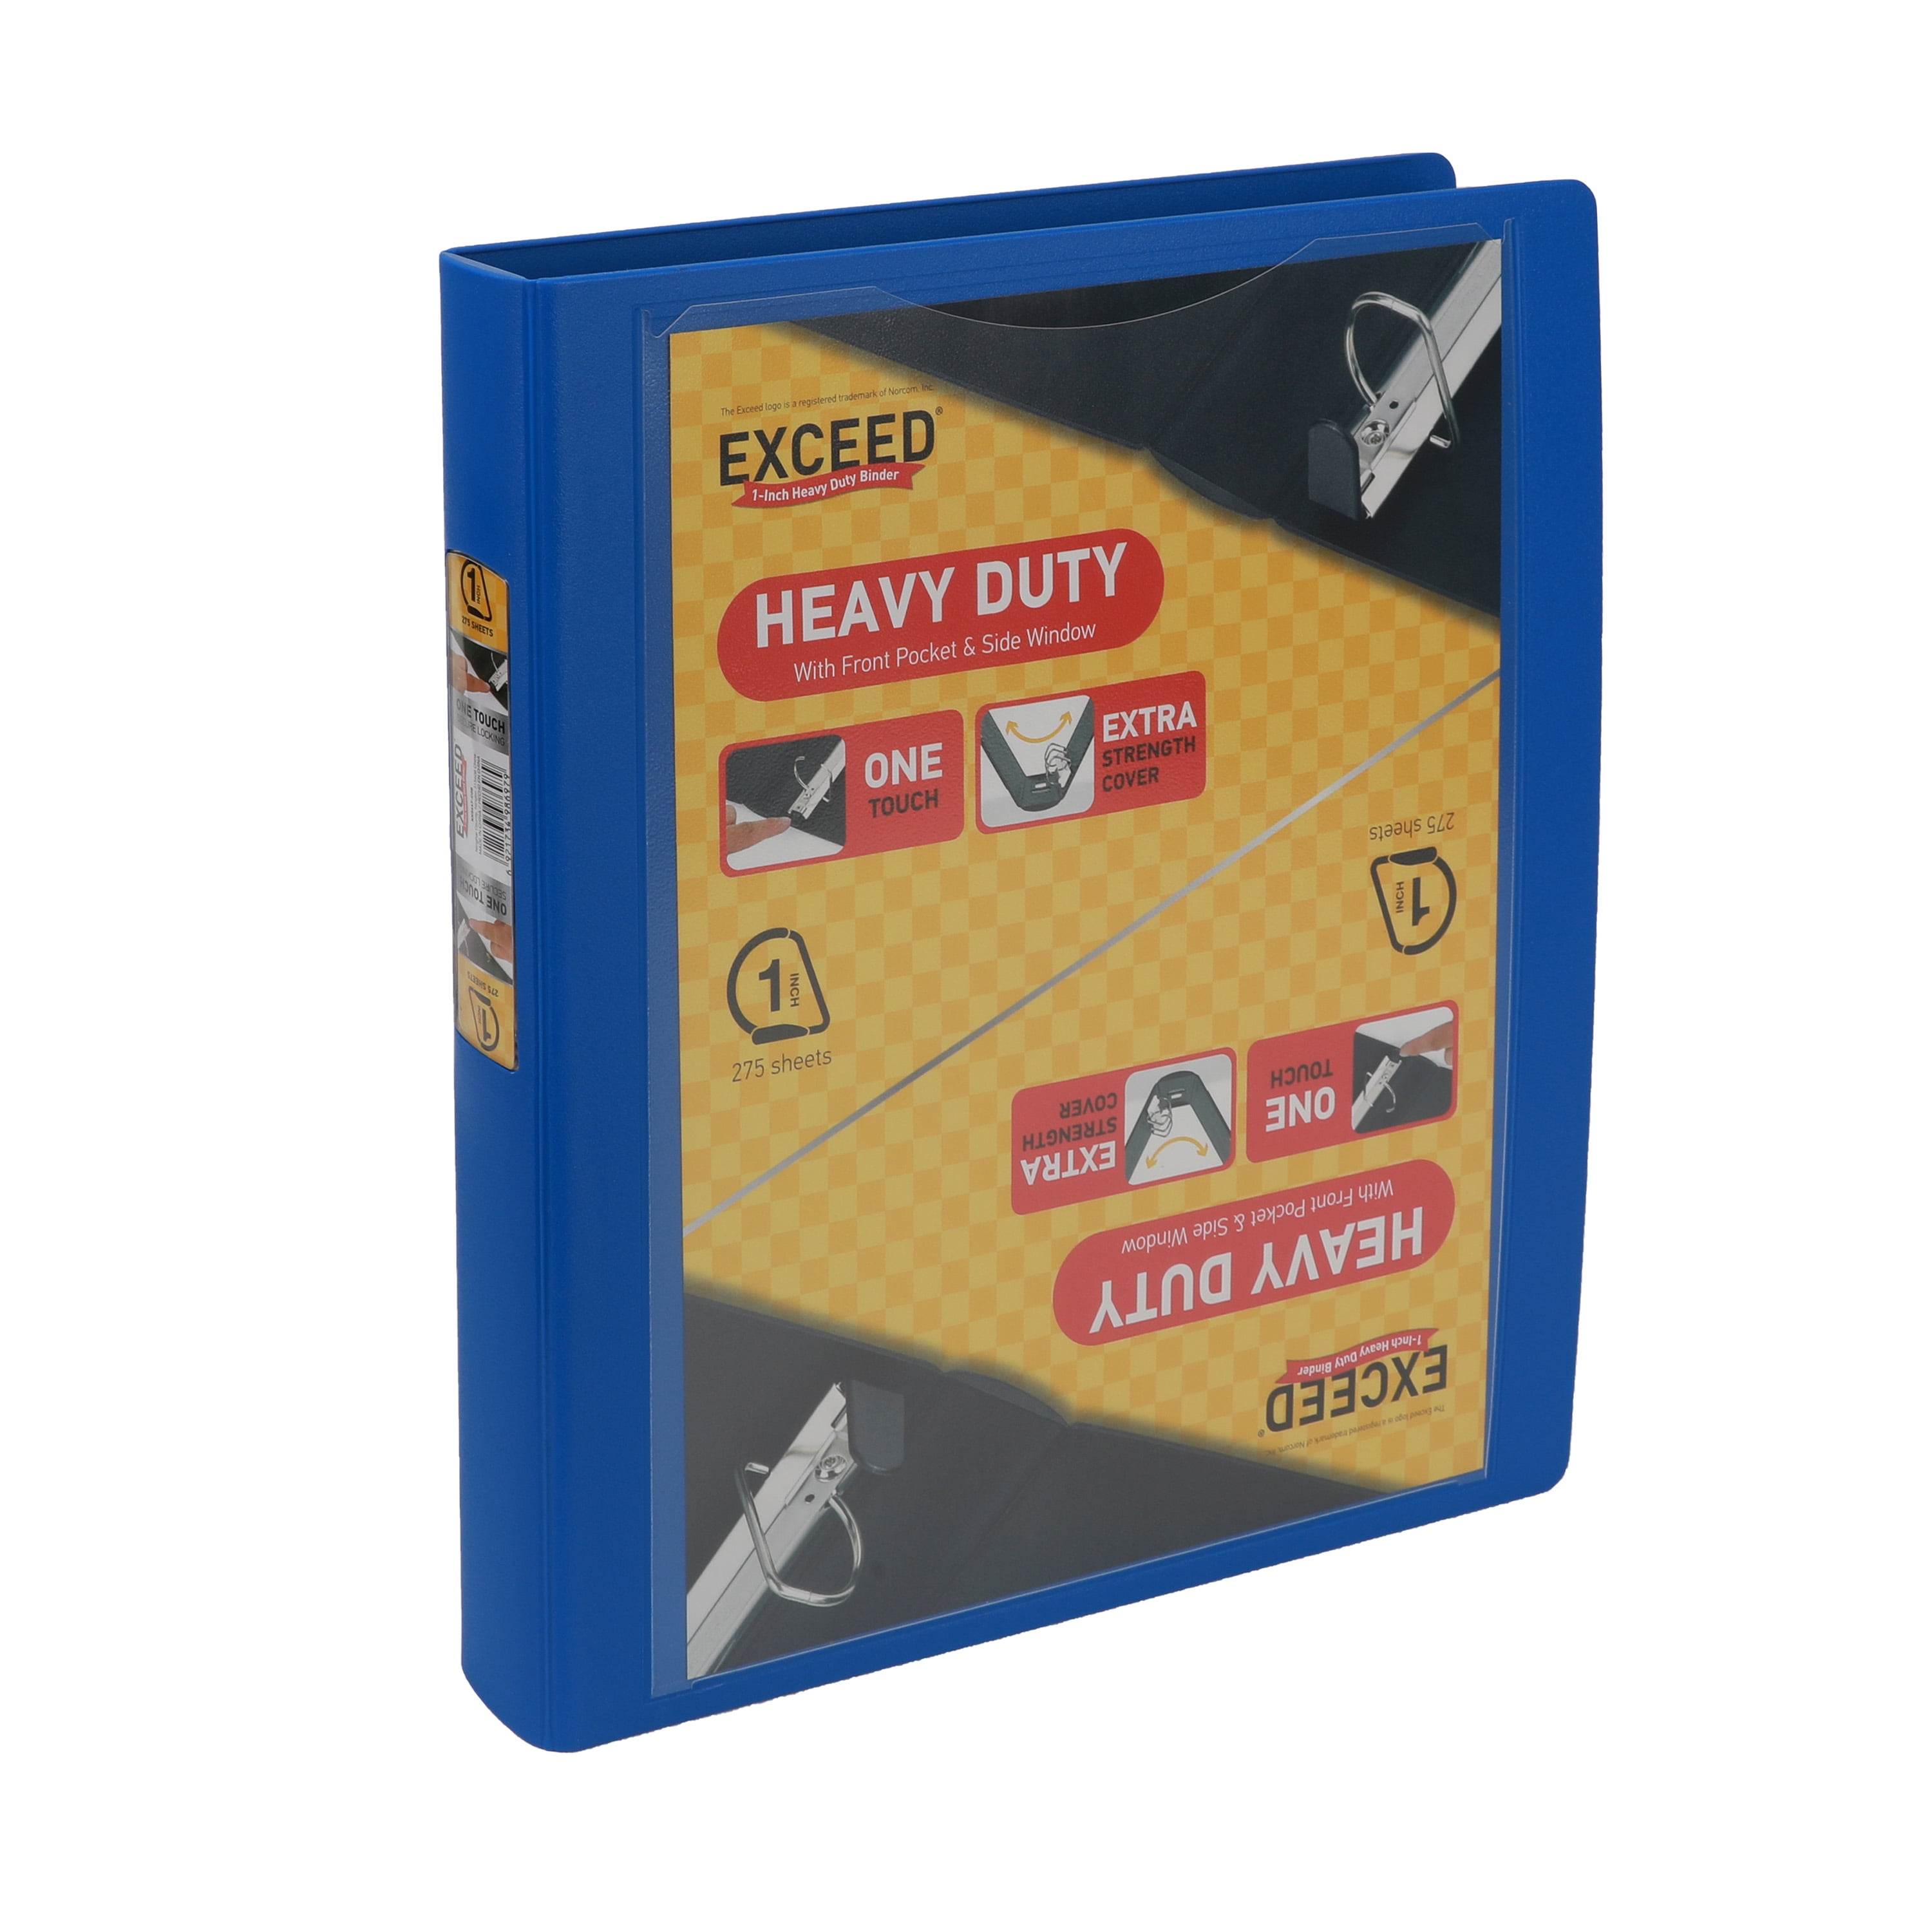 Coral 2 Pack EXCEED Heavy Duty Binder 1” Holds 275 Sheets 